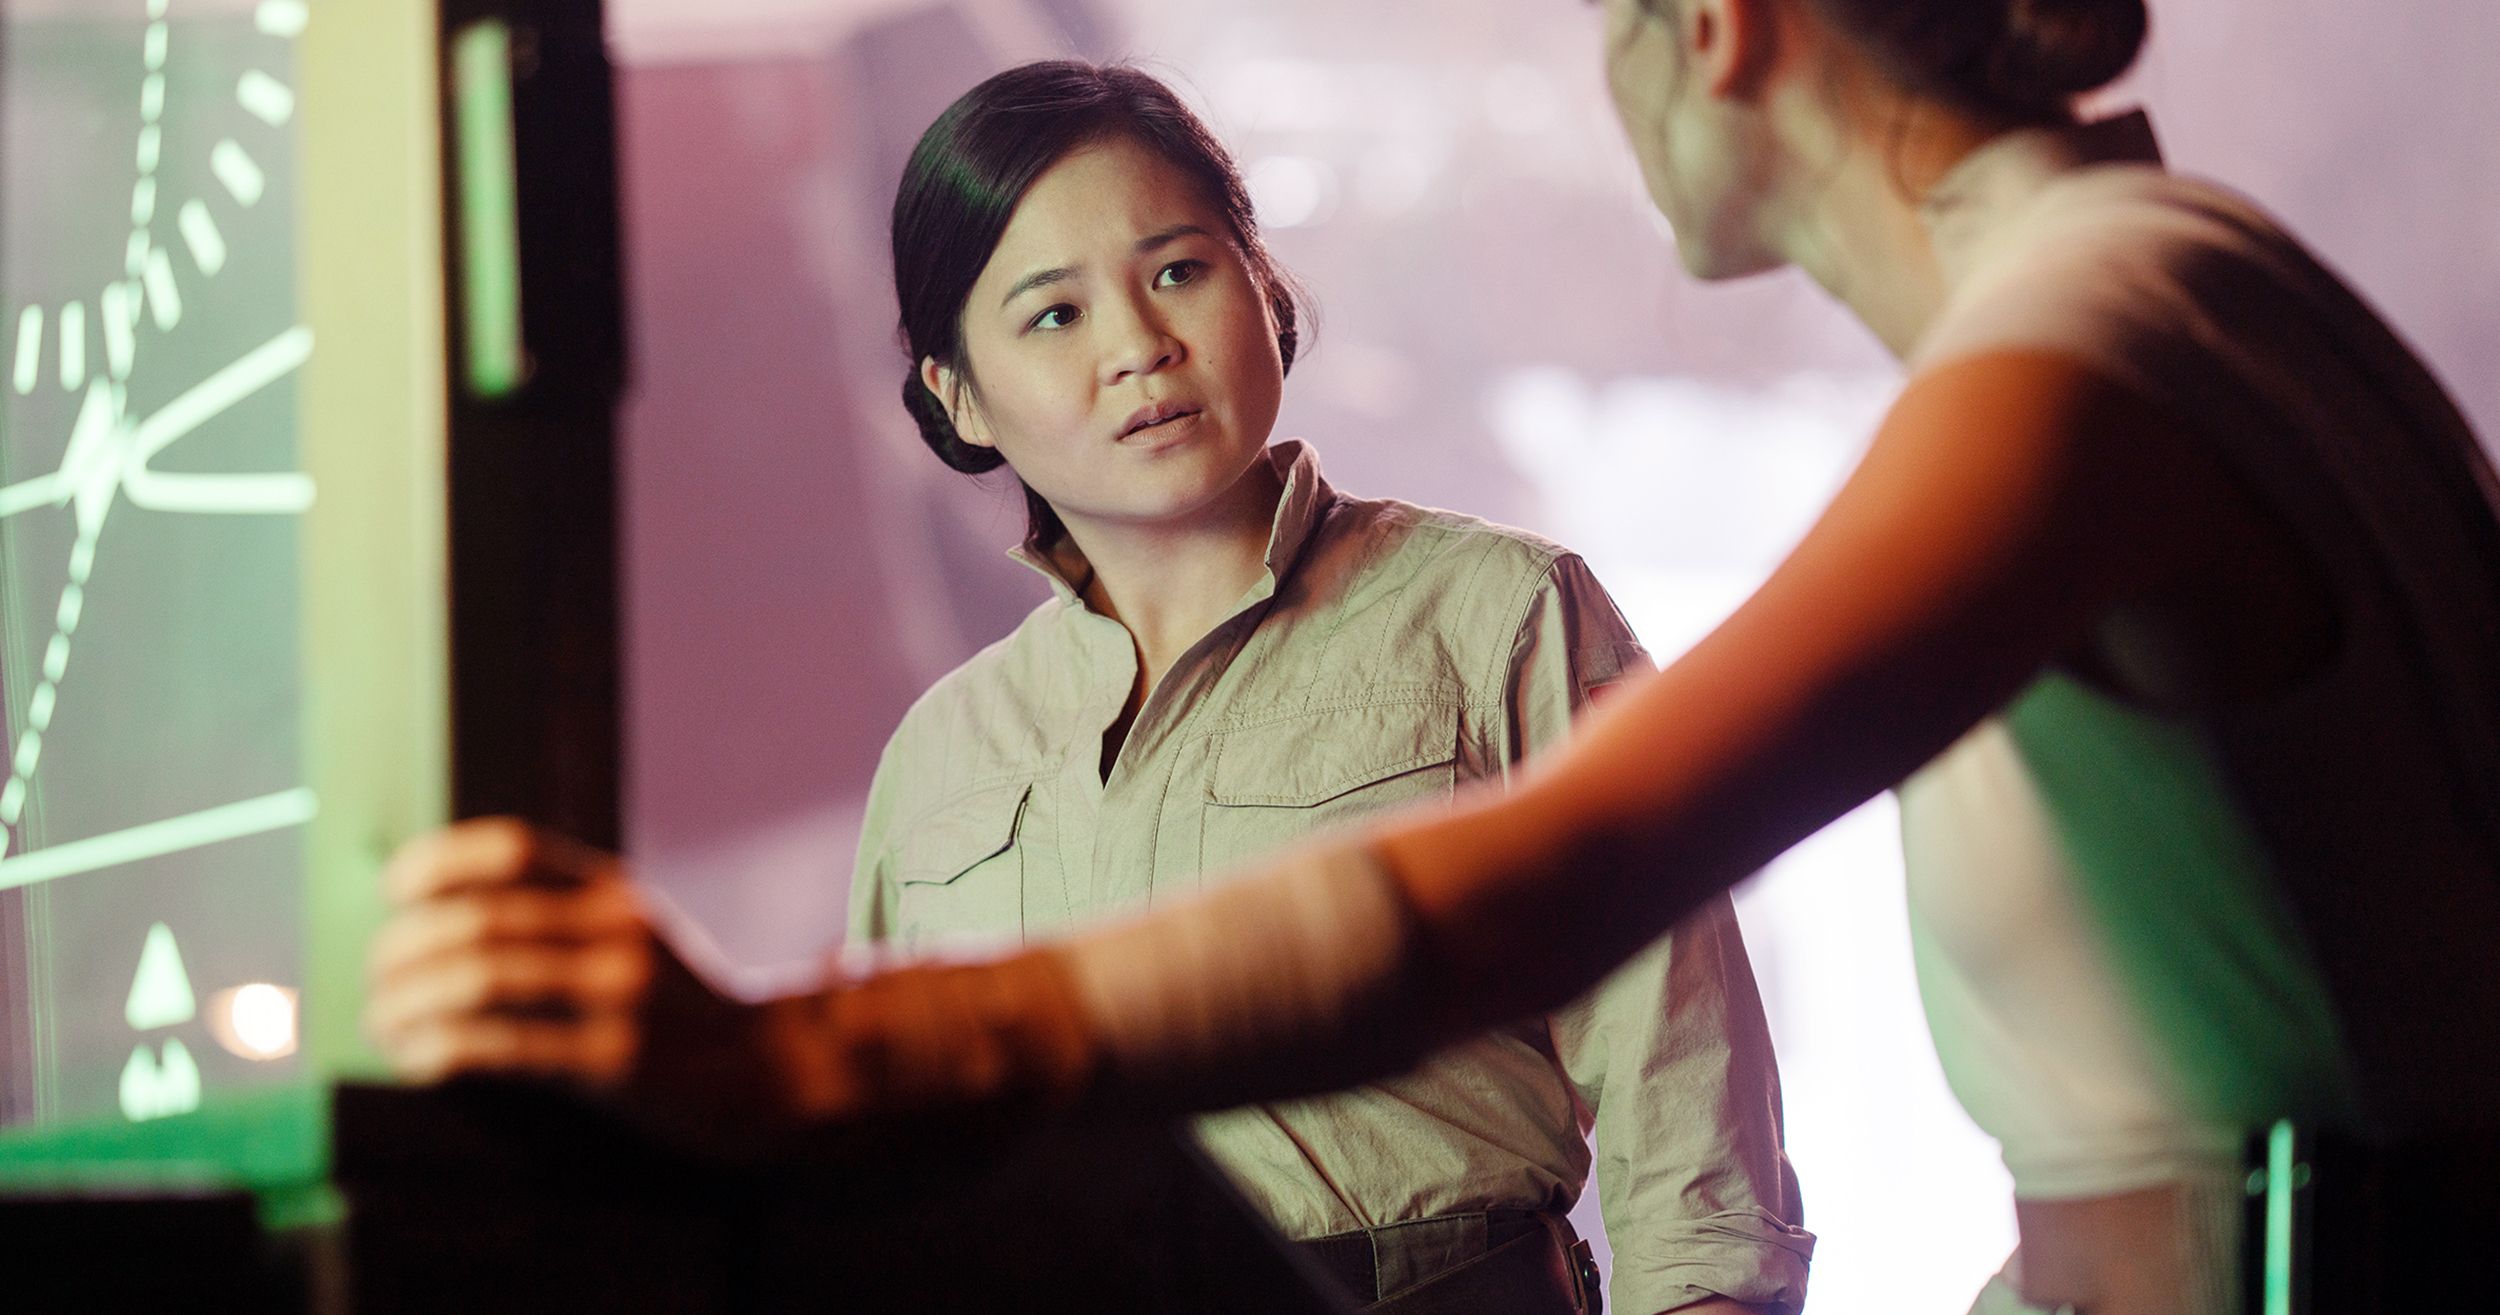 Kelly Marie Tran Won't Return to Social Media: I've Truly Been So Much Happier